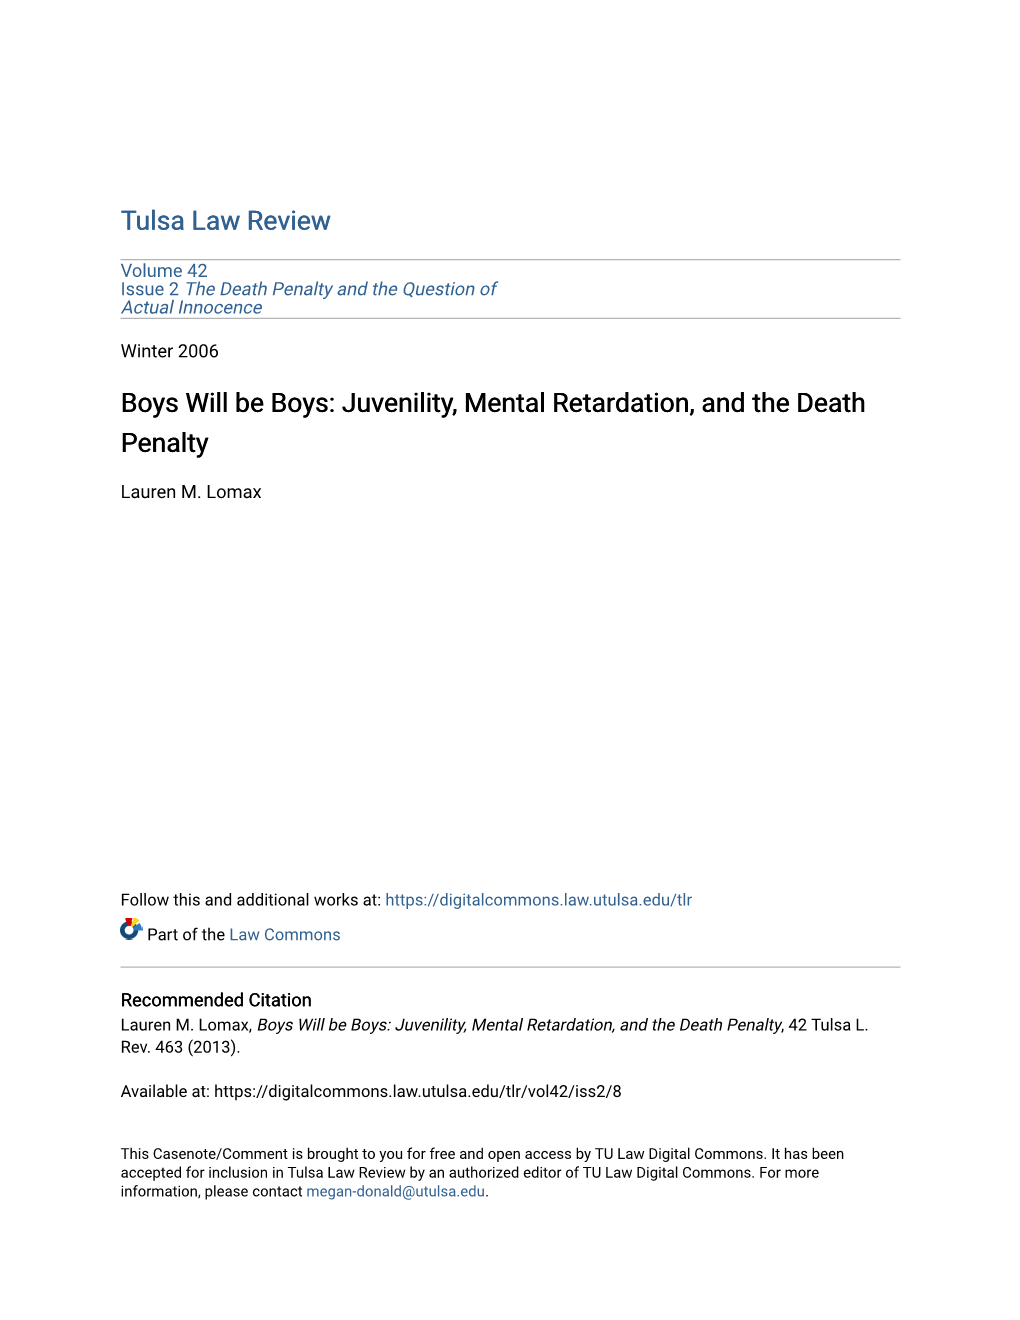 Juvenility, Mental Retardation, and the Death Penalty